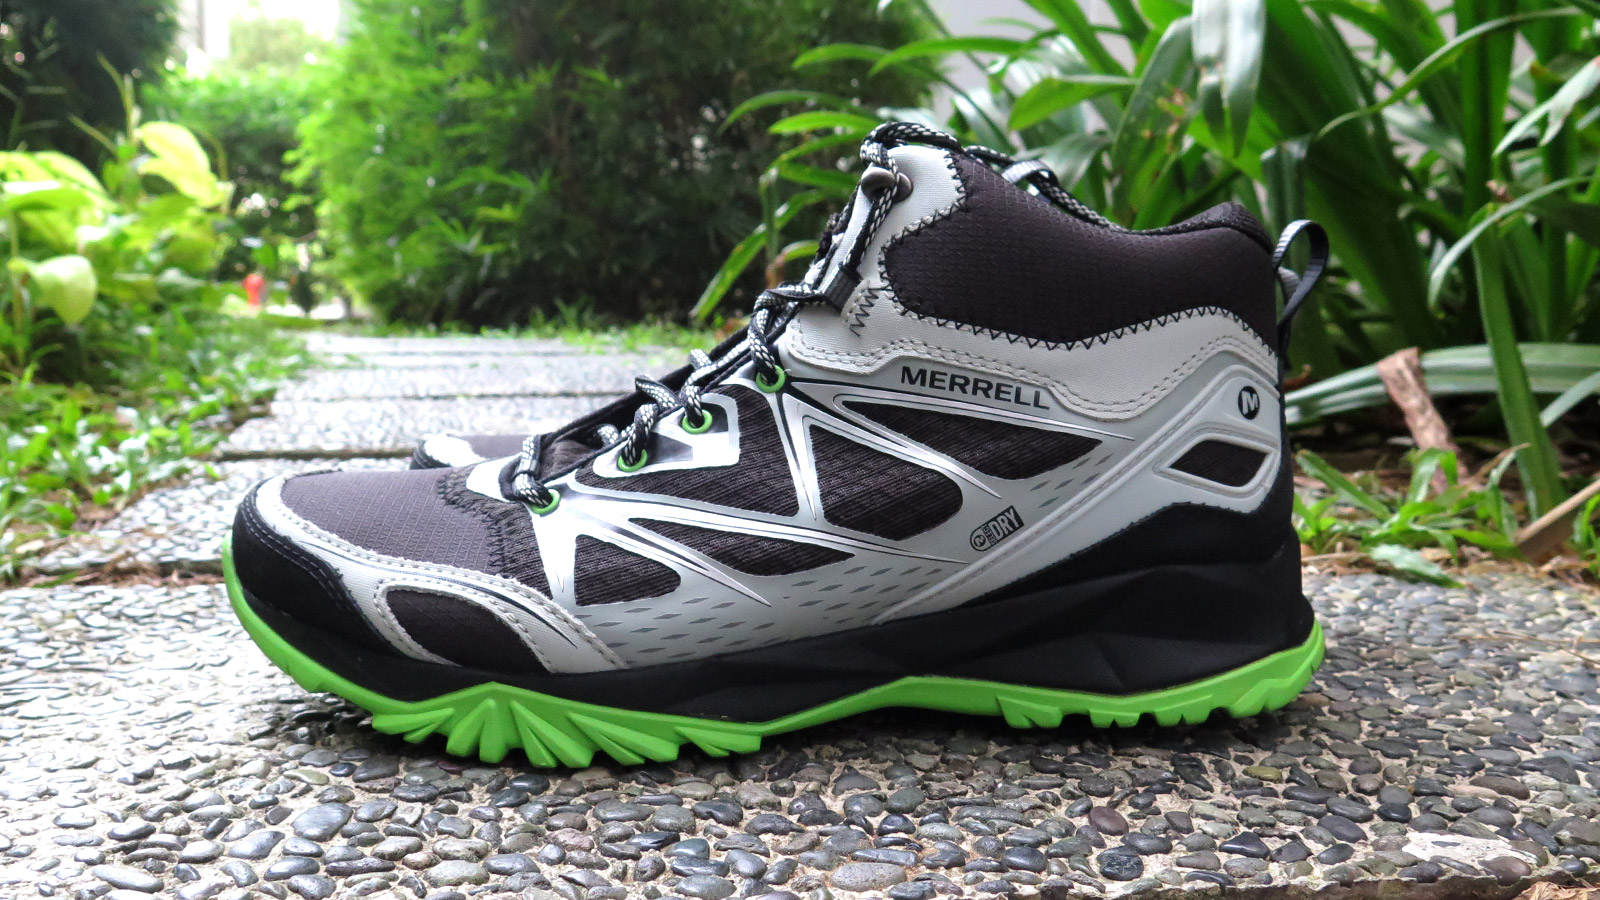 Why Bought Merrell Capra Bolt Mid-height Waterproof Shoes